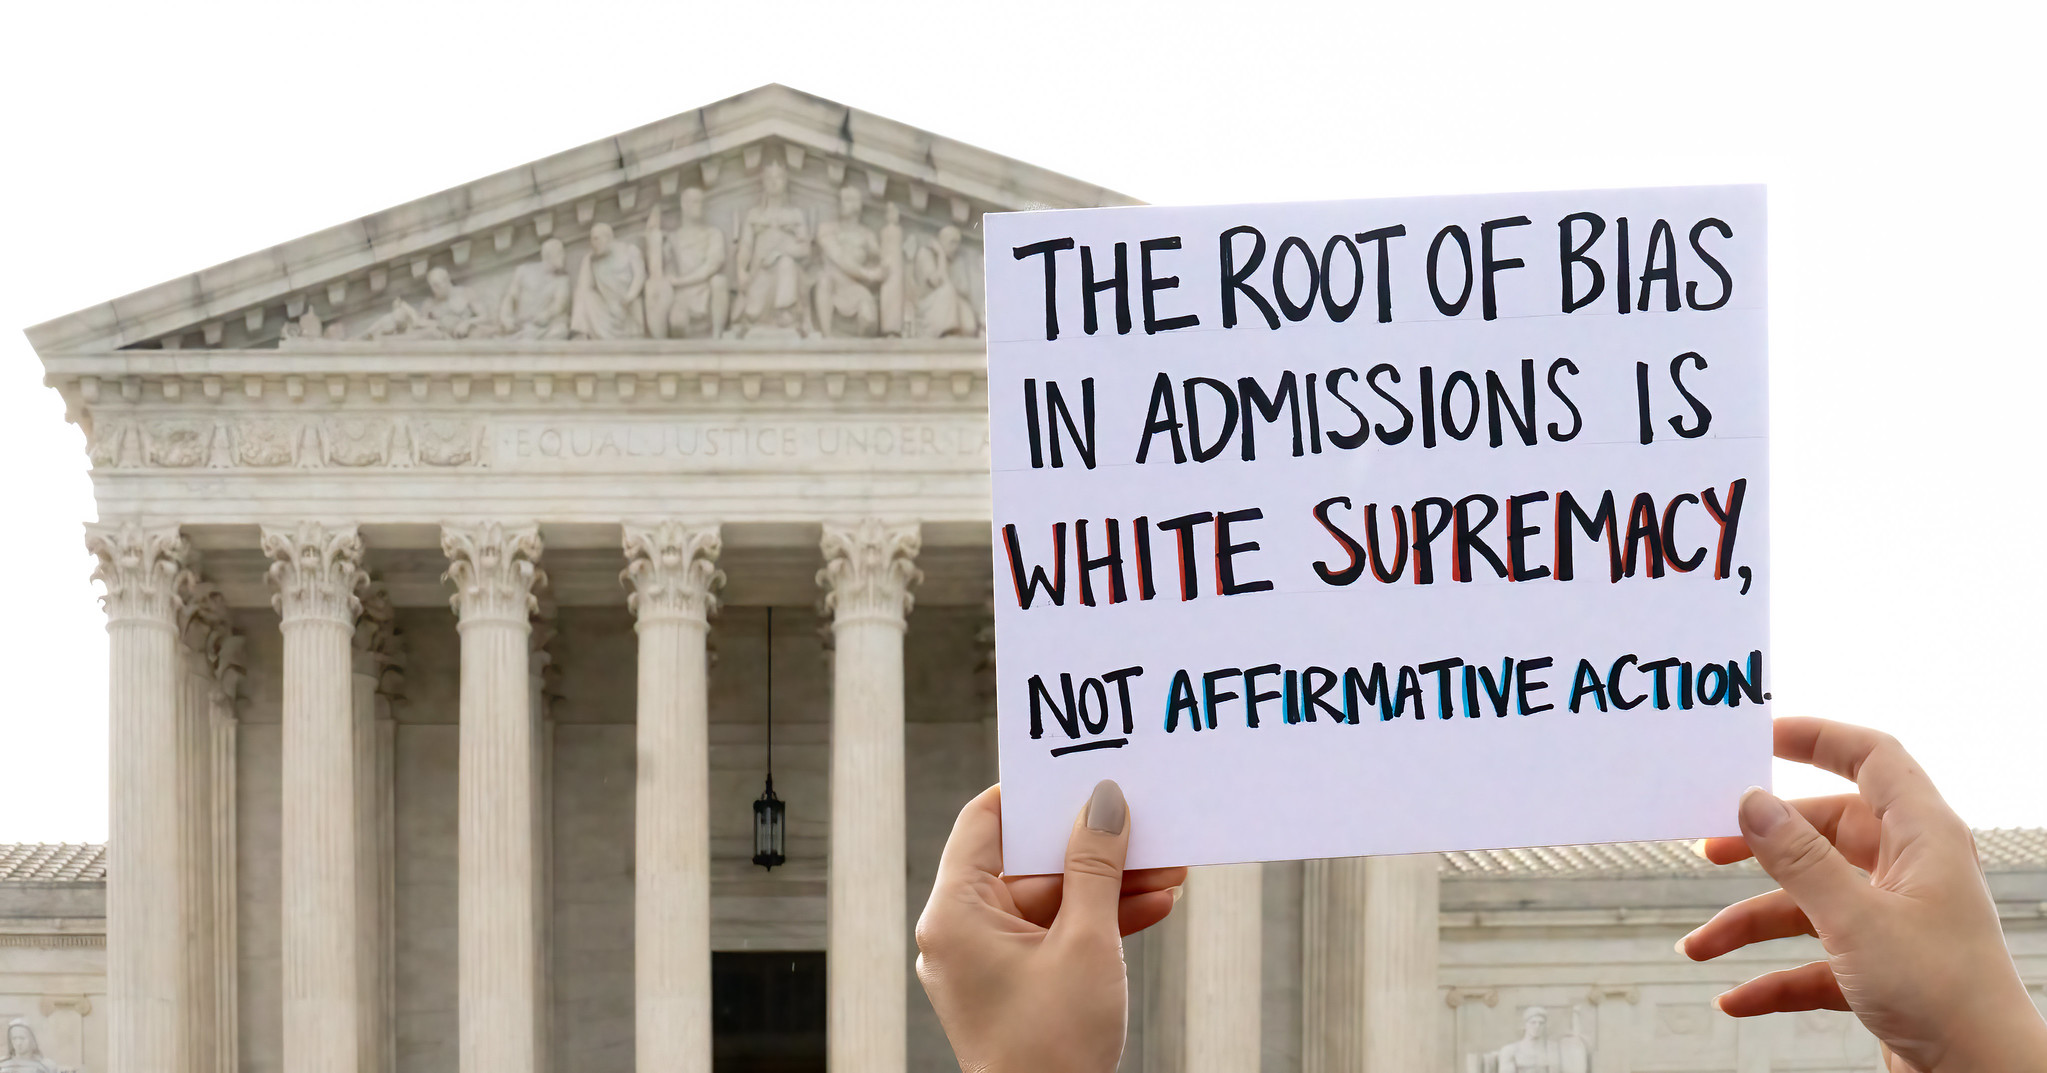 Asian Americans must reckon with how the fight to remove affirmative action is rooted in anti-Blackness